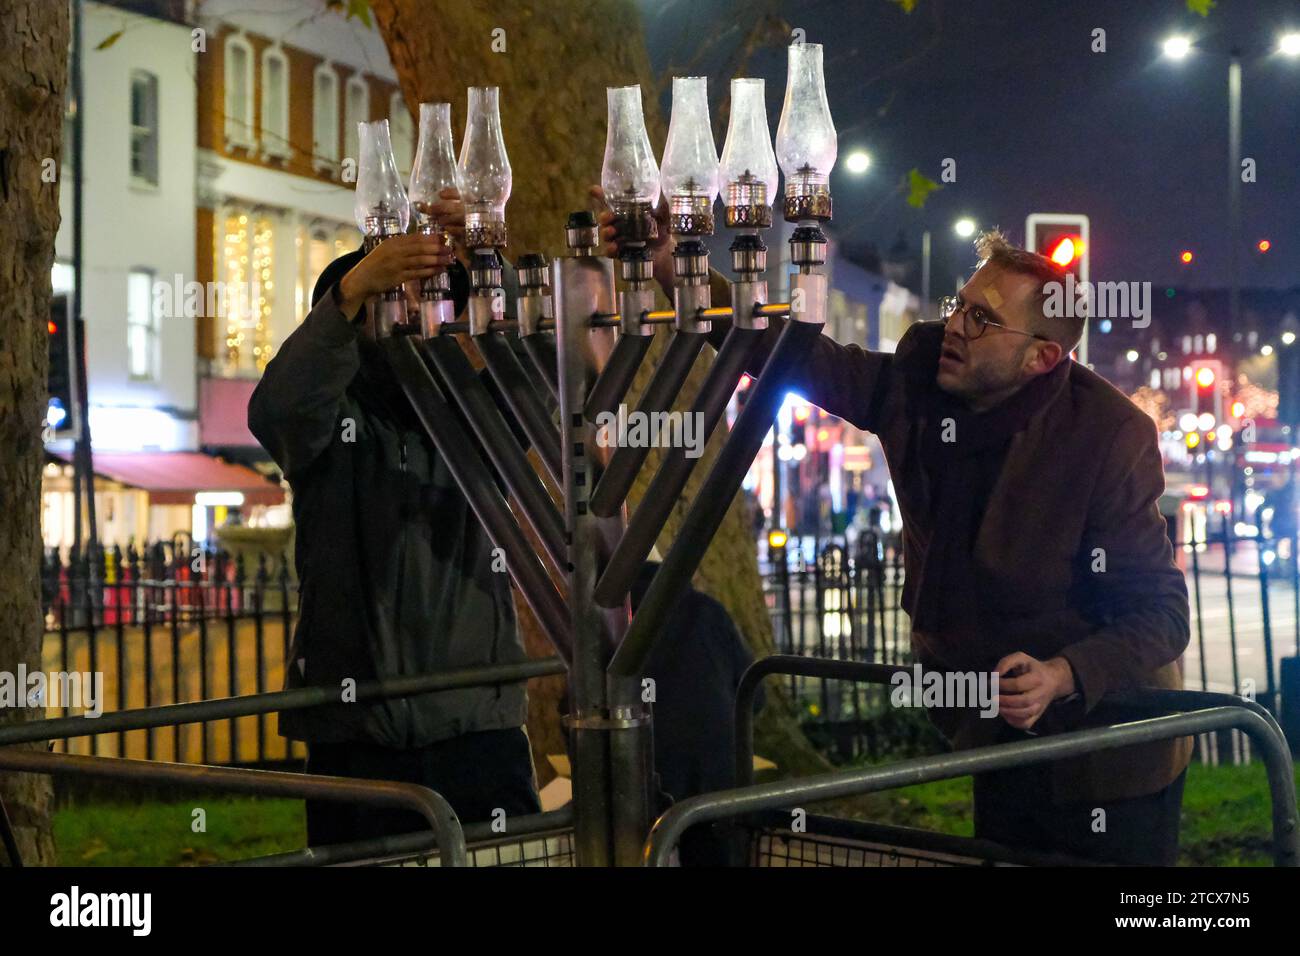 London, UK. 14th December, 2023. A memorah is reinstalled in Islington Green. A solidarity event attended by MPs, community leaders and members of the public was held after the menorah was vandalised earlier today. Rabbi Mendy Korer led the proceedings, relighting the candles  - and the eighth and final one for the Hanukkah festival. The Metropolitan Police investigating, believe that the menorah was intentionally damaged, as antisemitic incidents increase since the Israel-Hamas war was declared. Credit: Eleventh Hour Photography/Alamy Live News Stock Photo